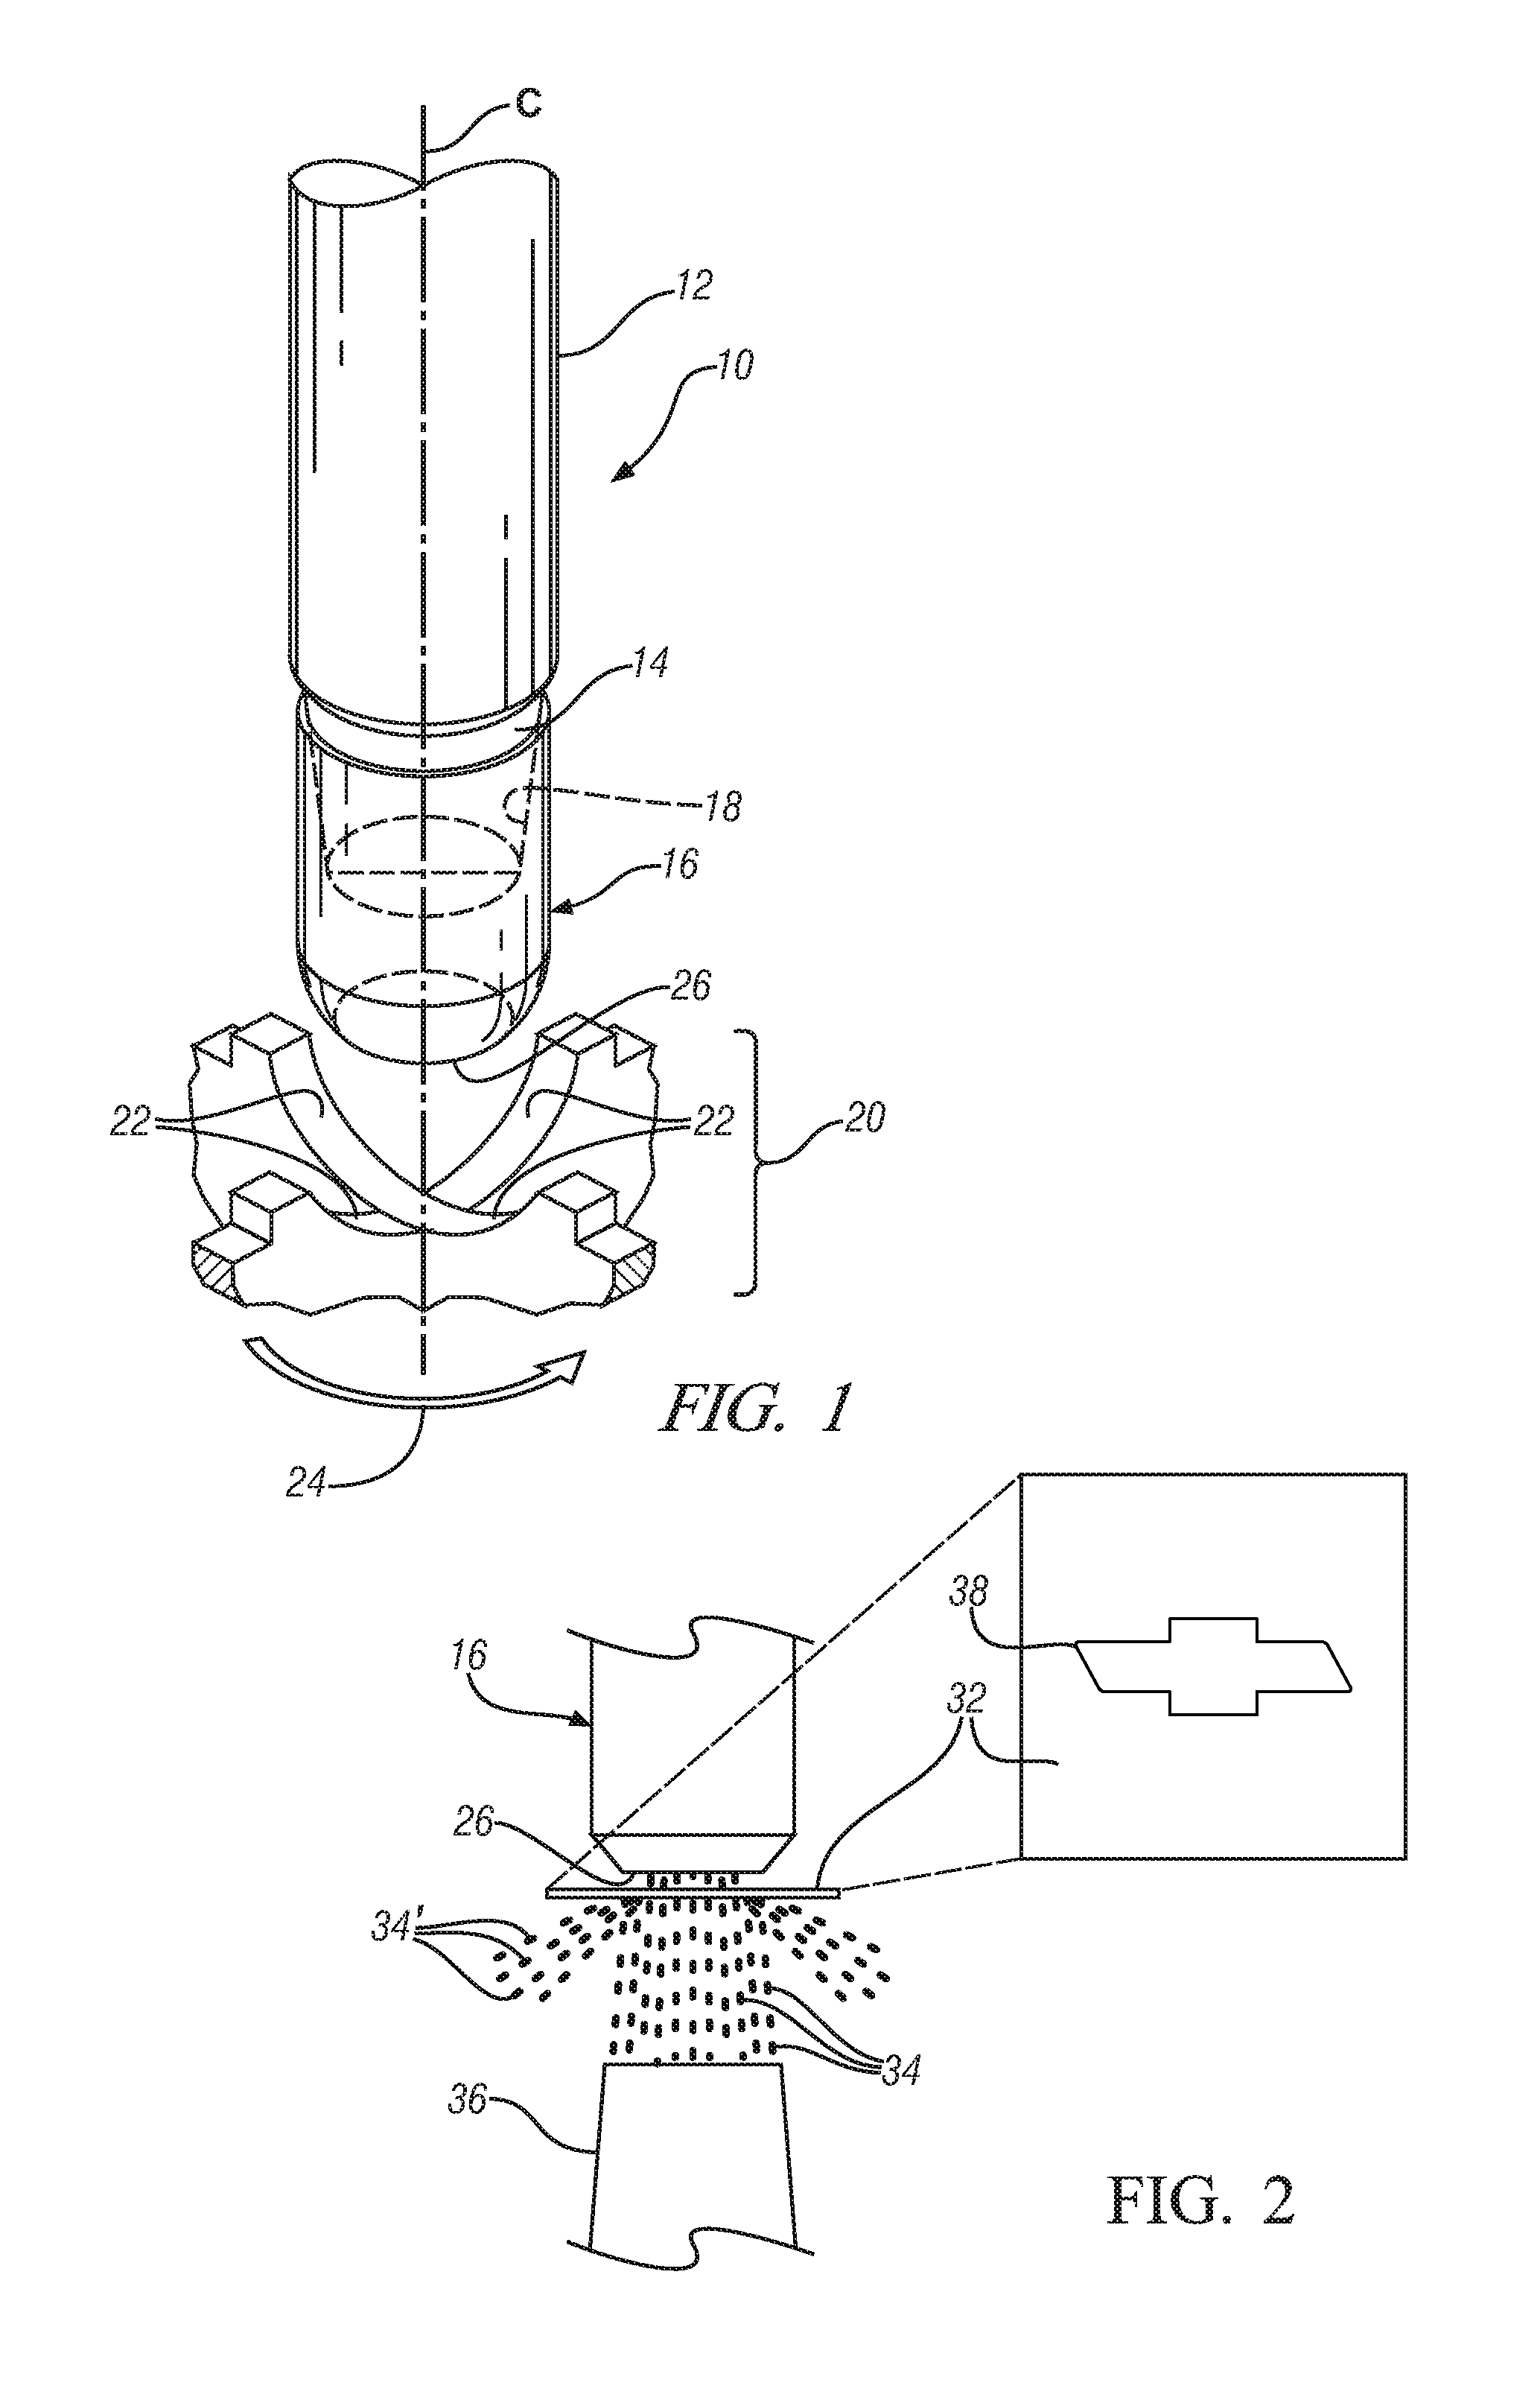 Application of surface relief to spot welding electrodes